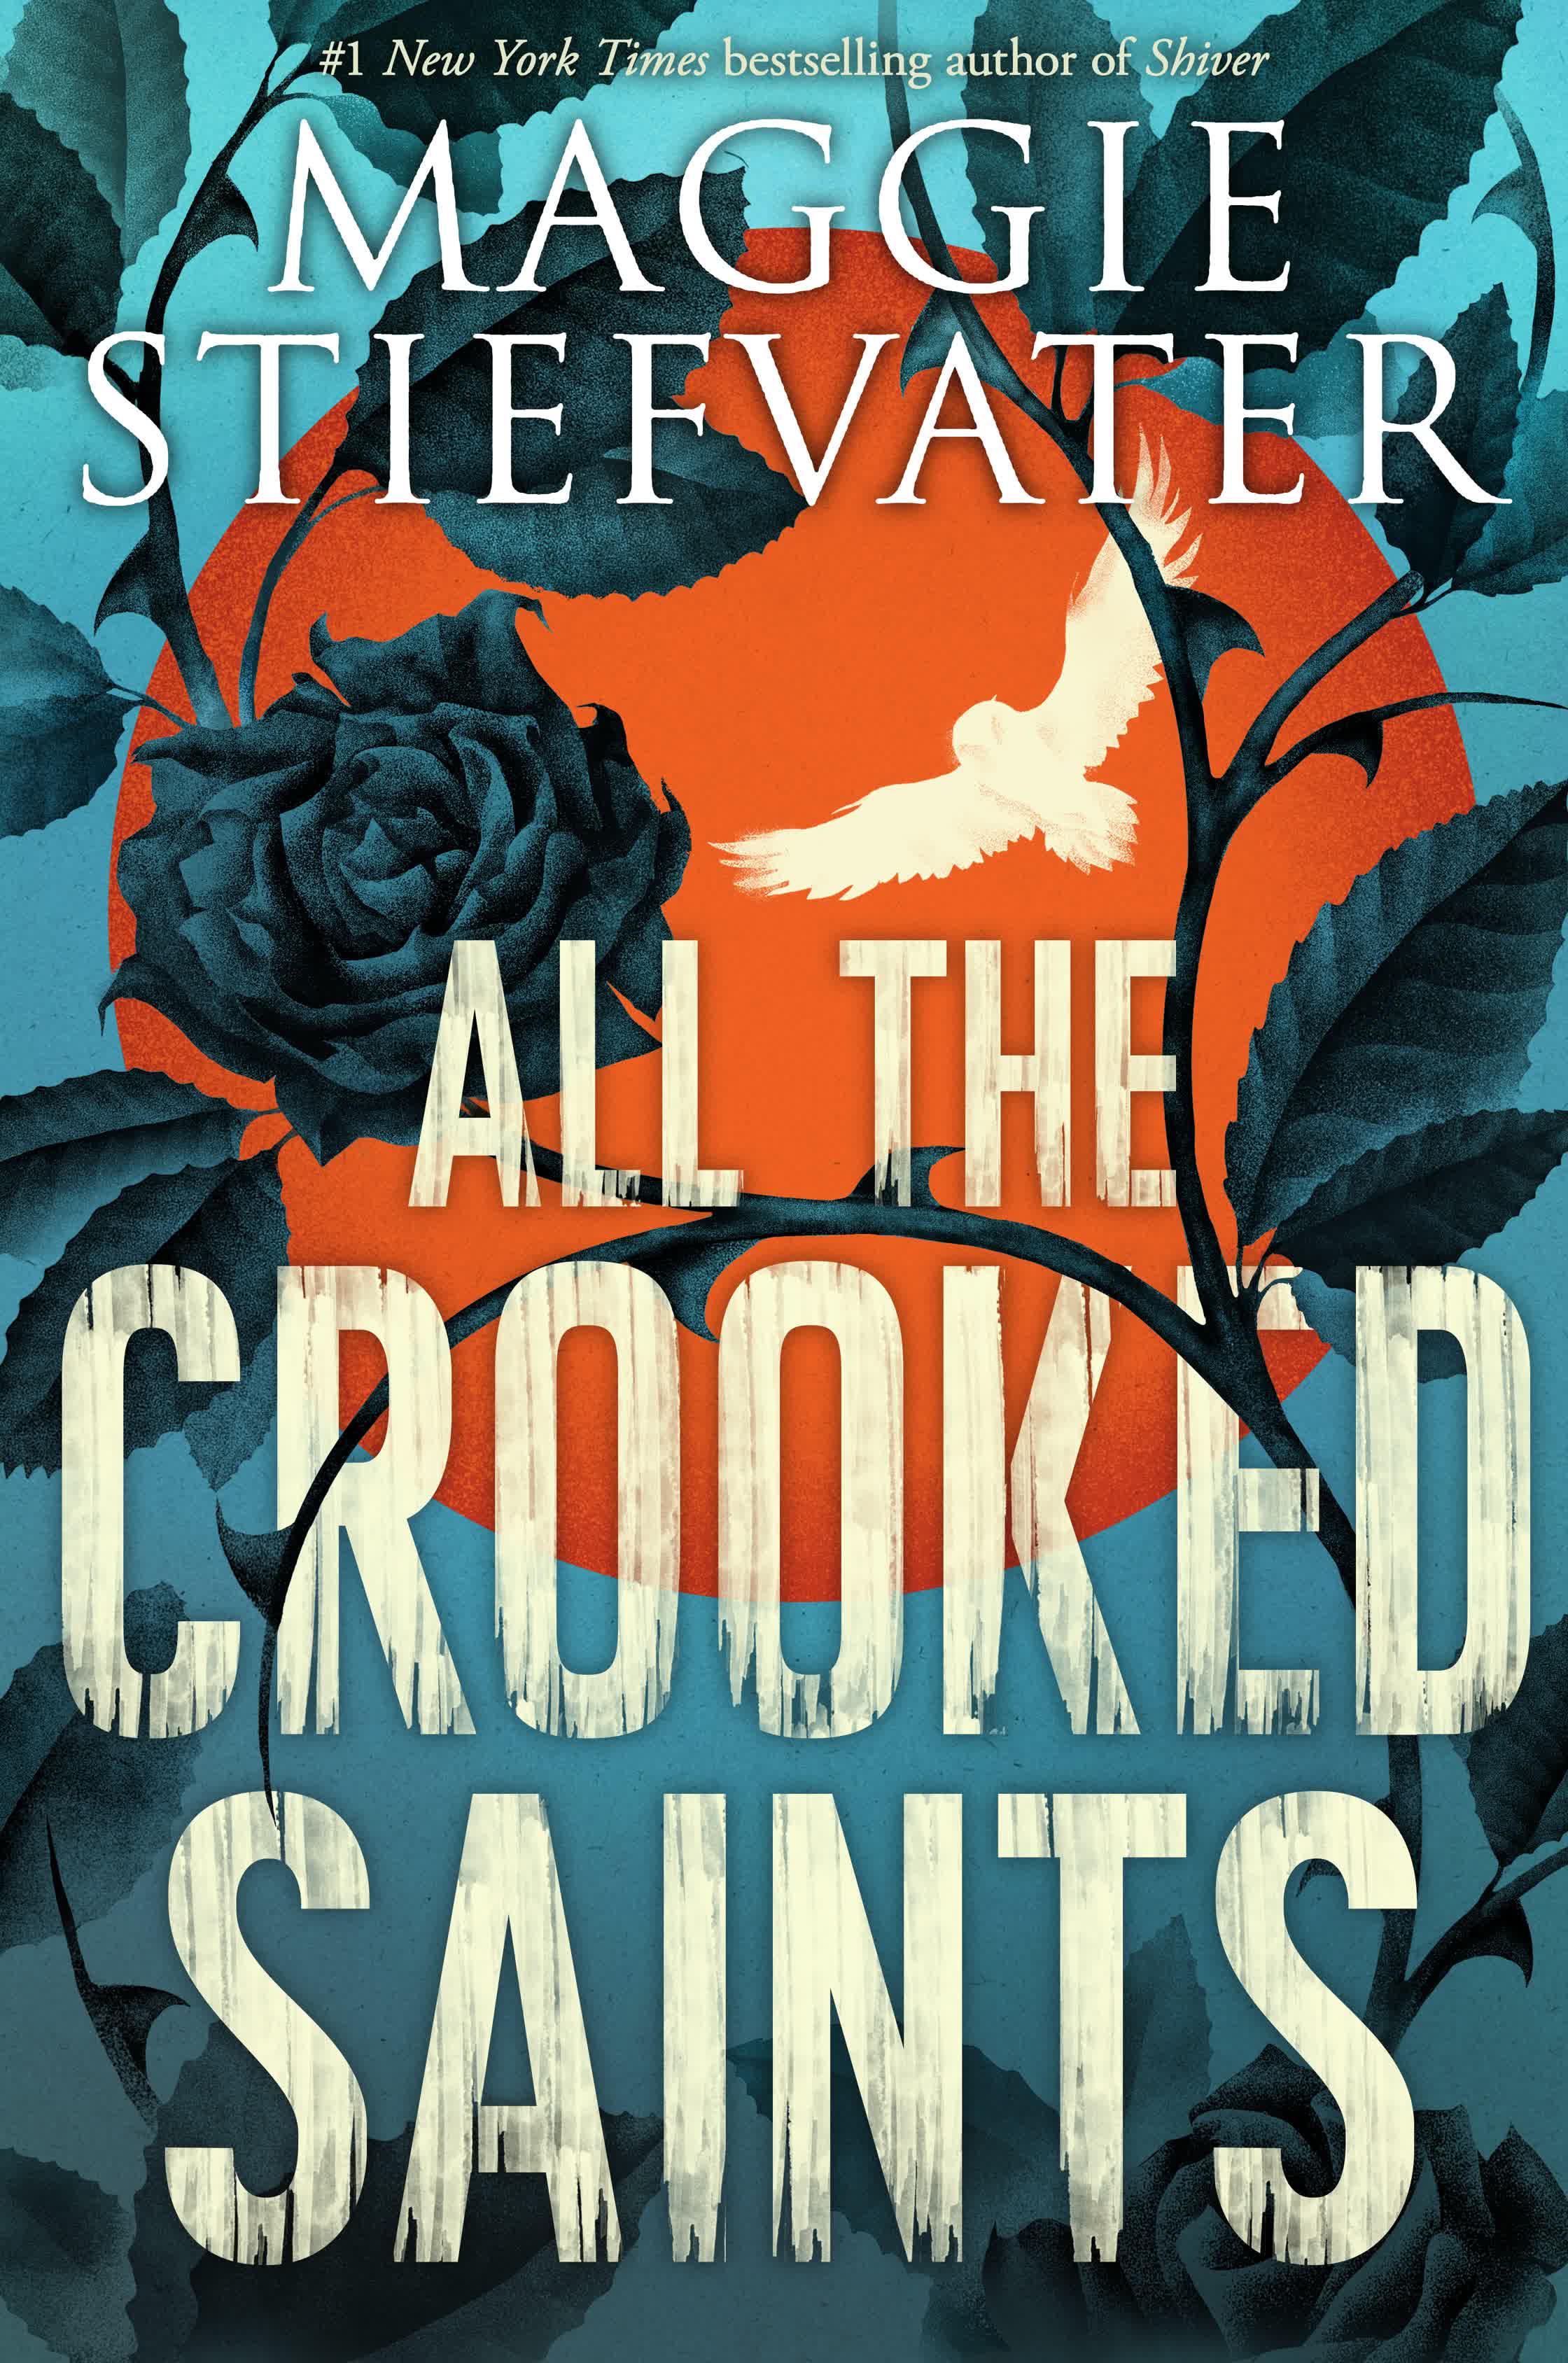 All the Crooked Saints - Maggie Stiefvater.jpg